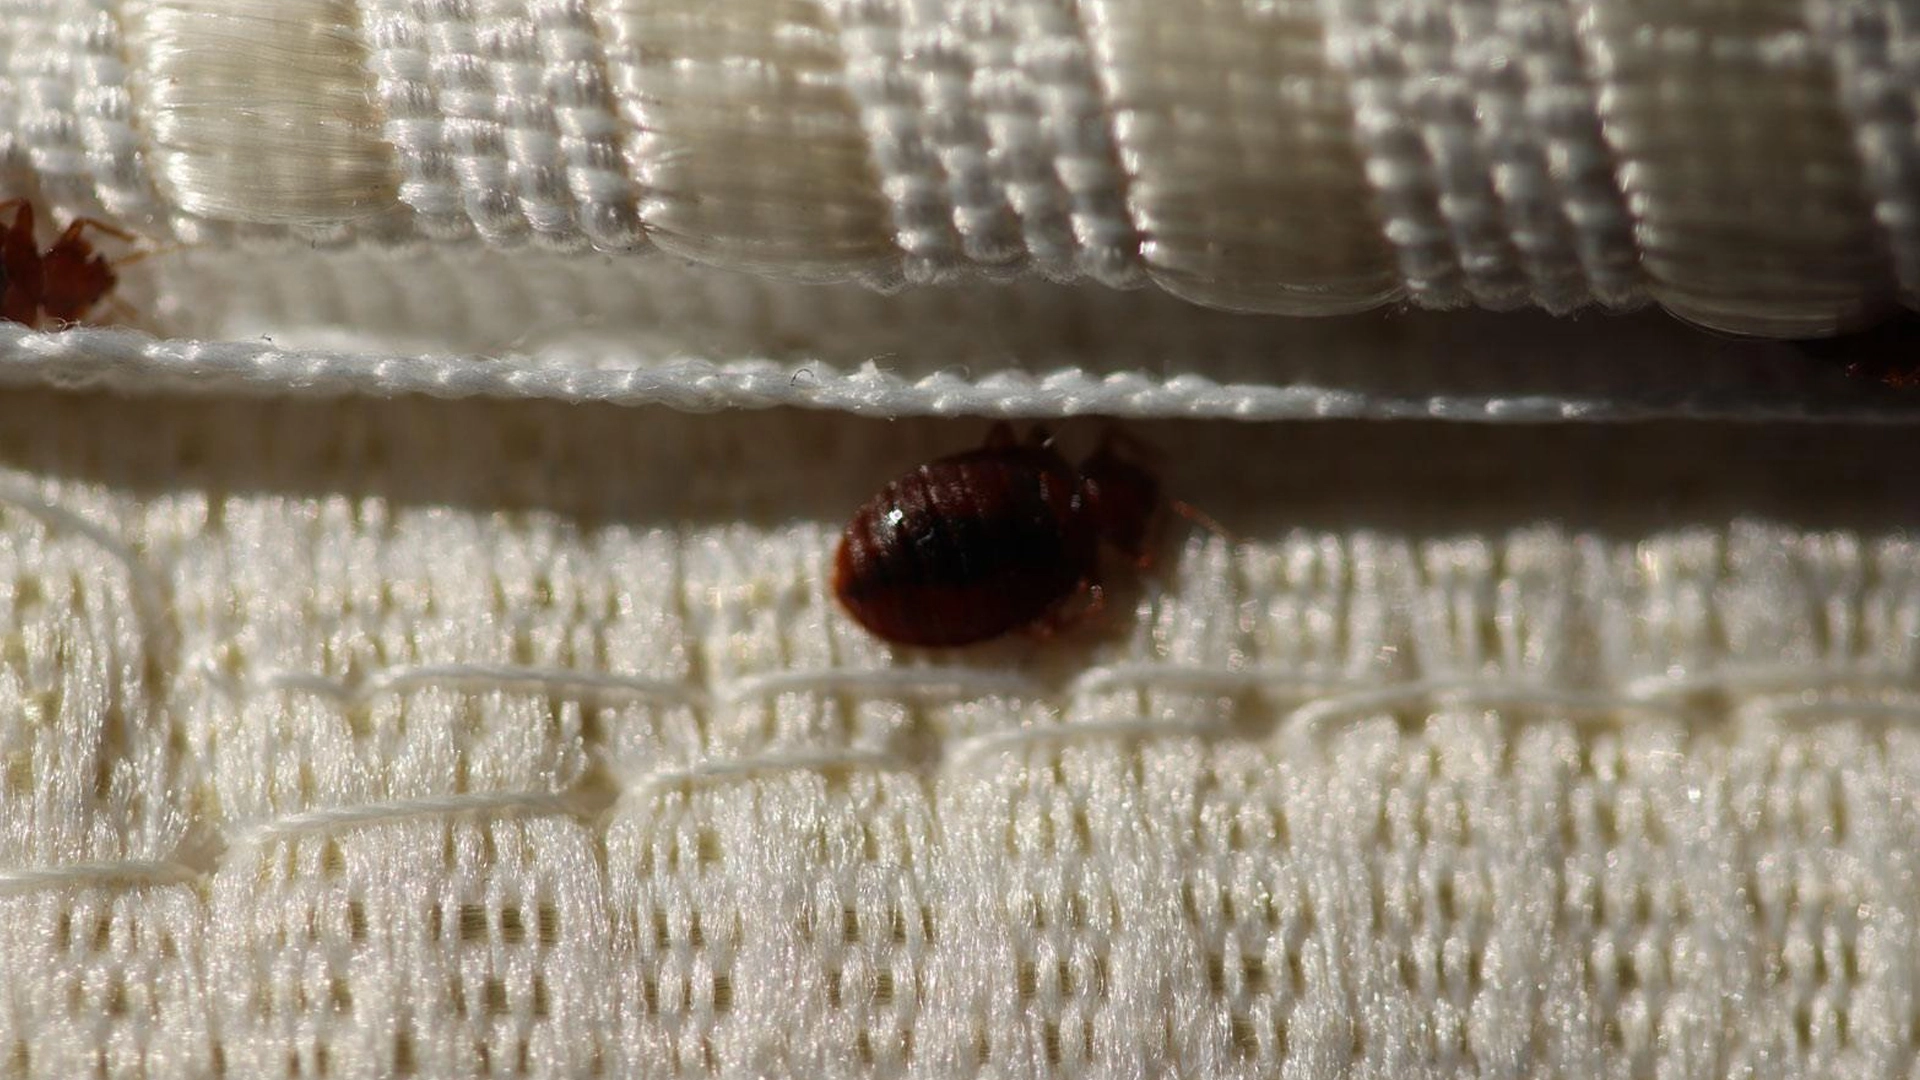 How to Check for Bed Bugs: A Guide